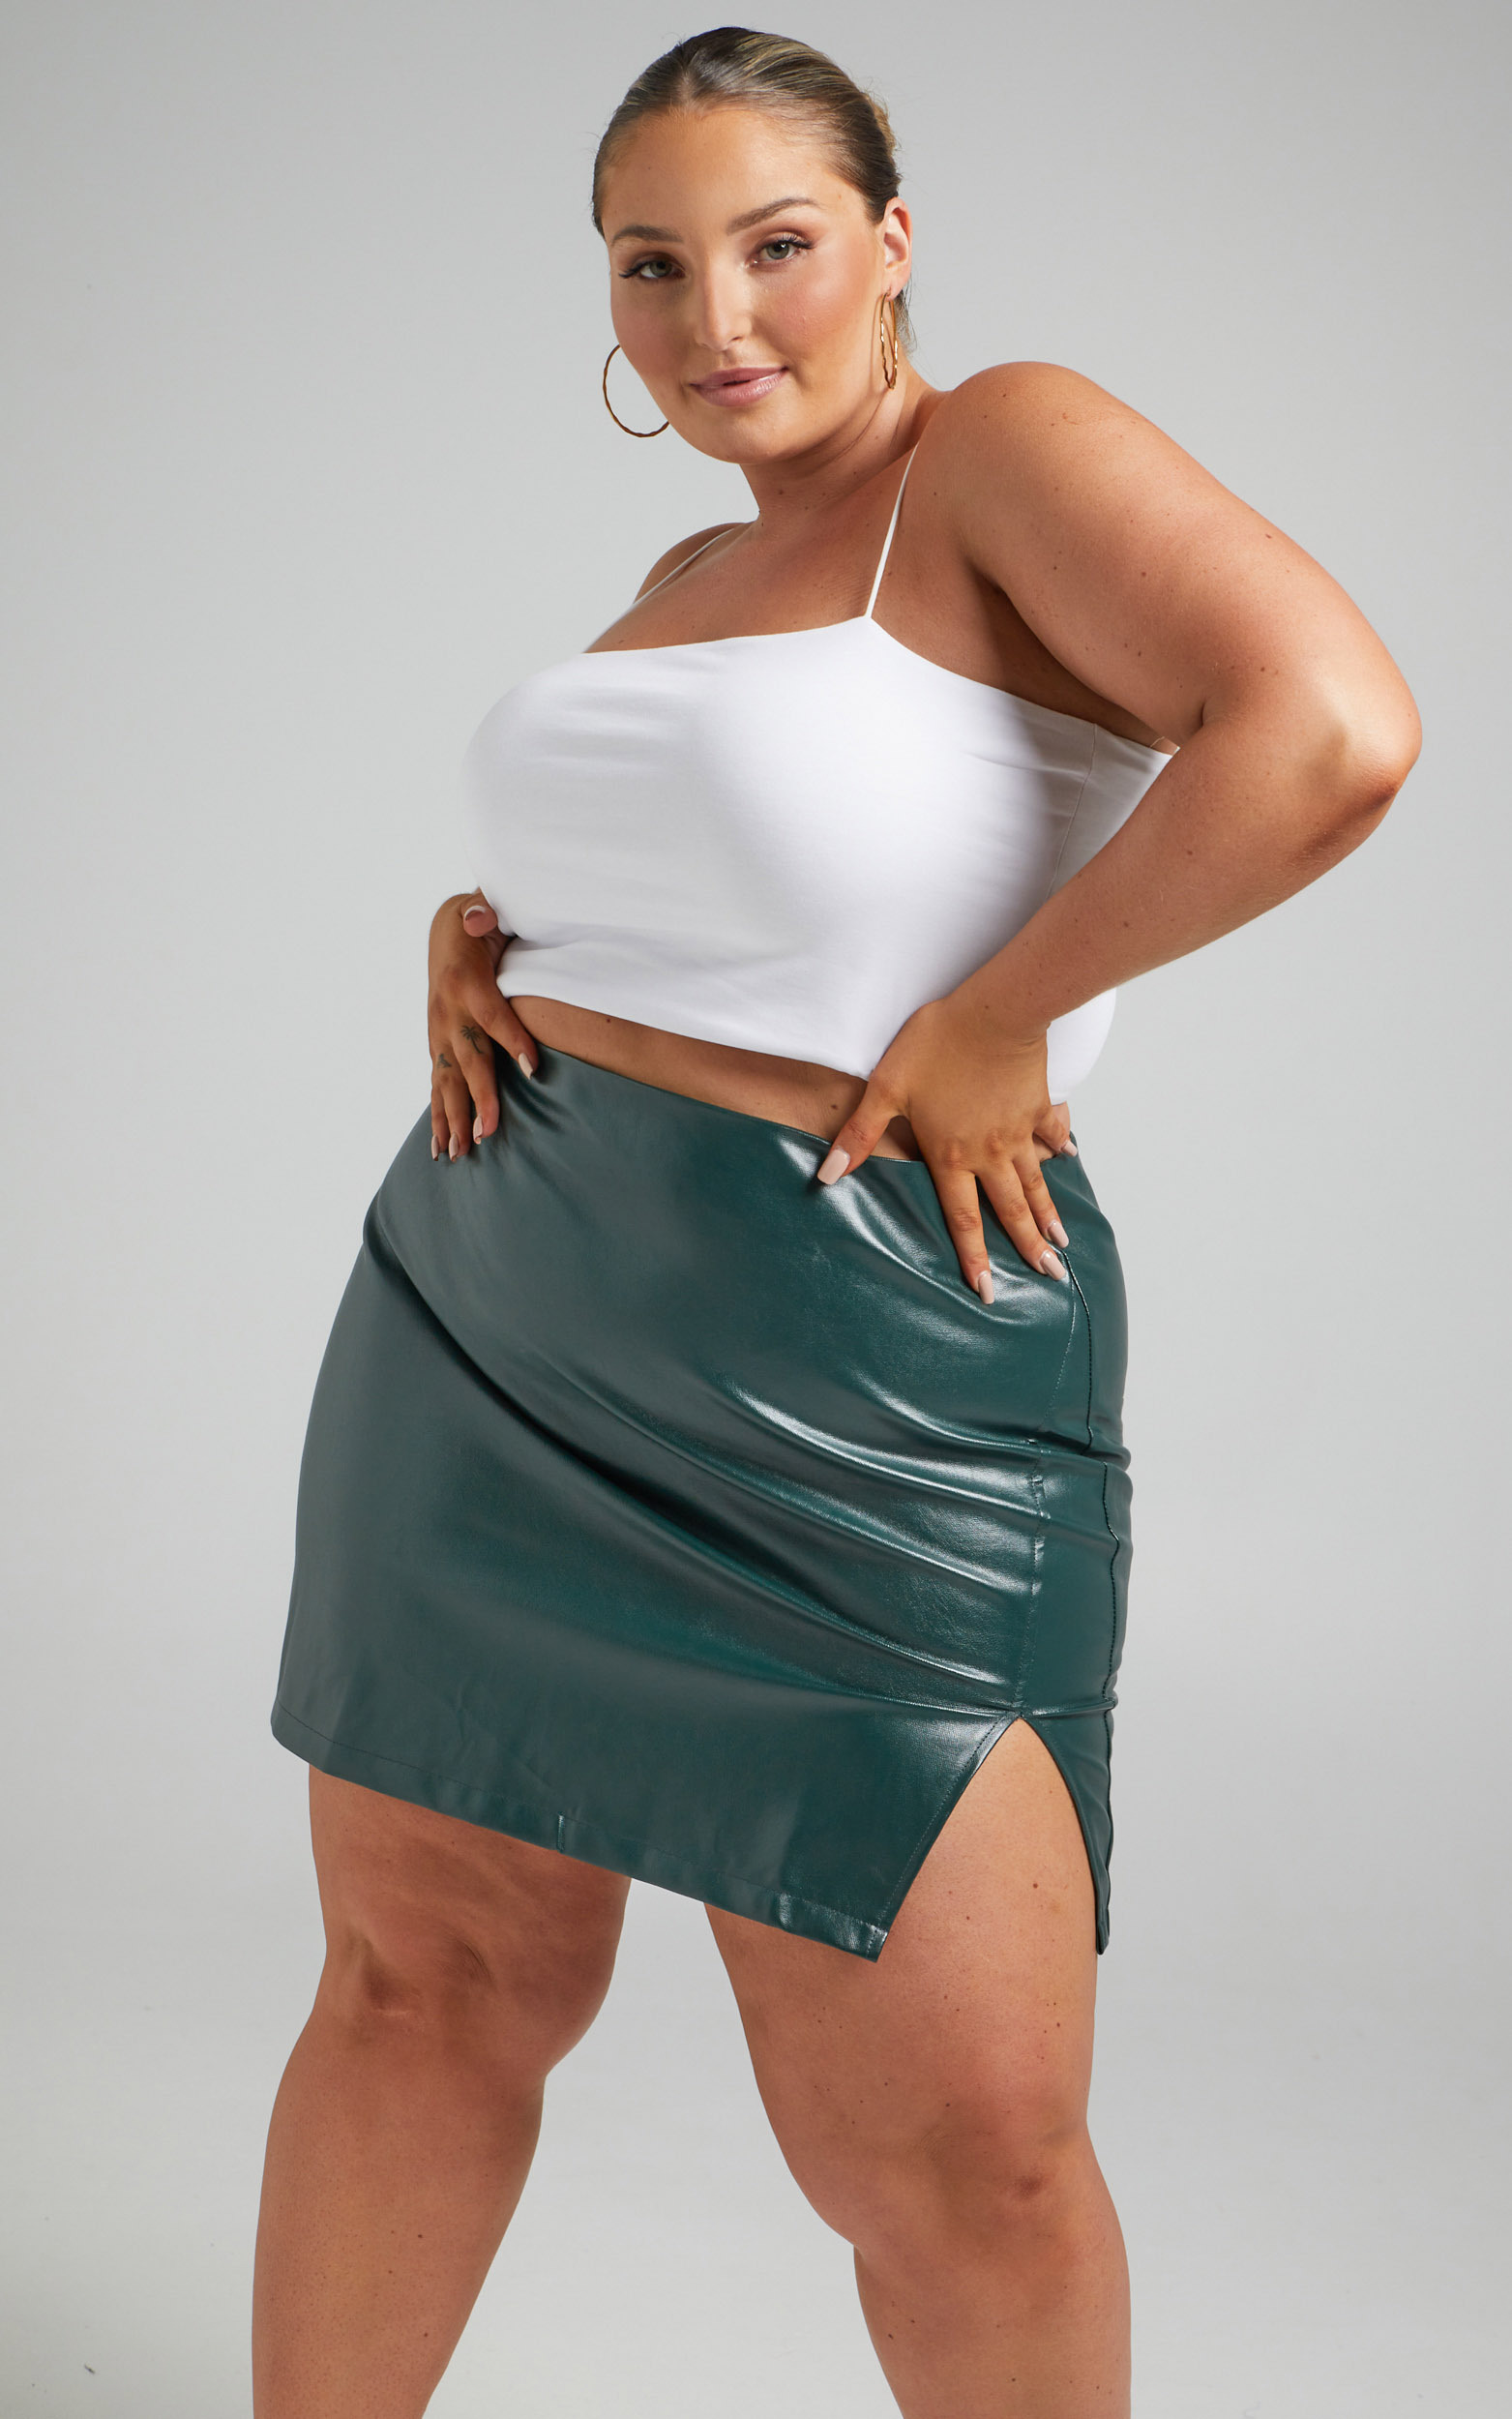 In The Name Of Love  Leatherette Mini Skirt in Emerald Leatherette - 04, GRN2, hi-res image number null